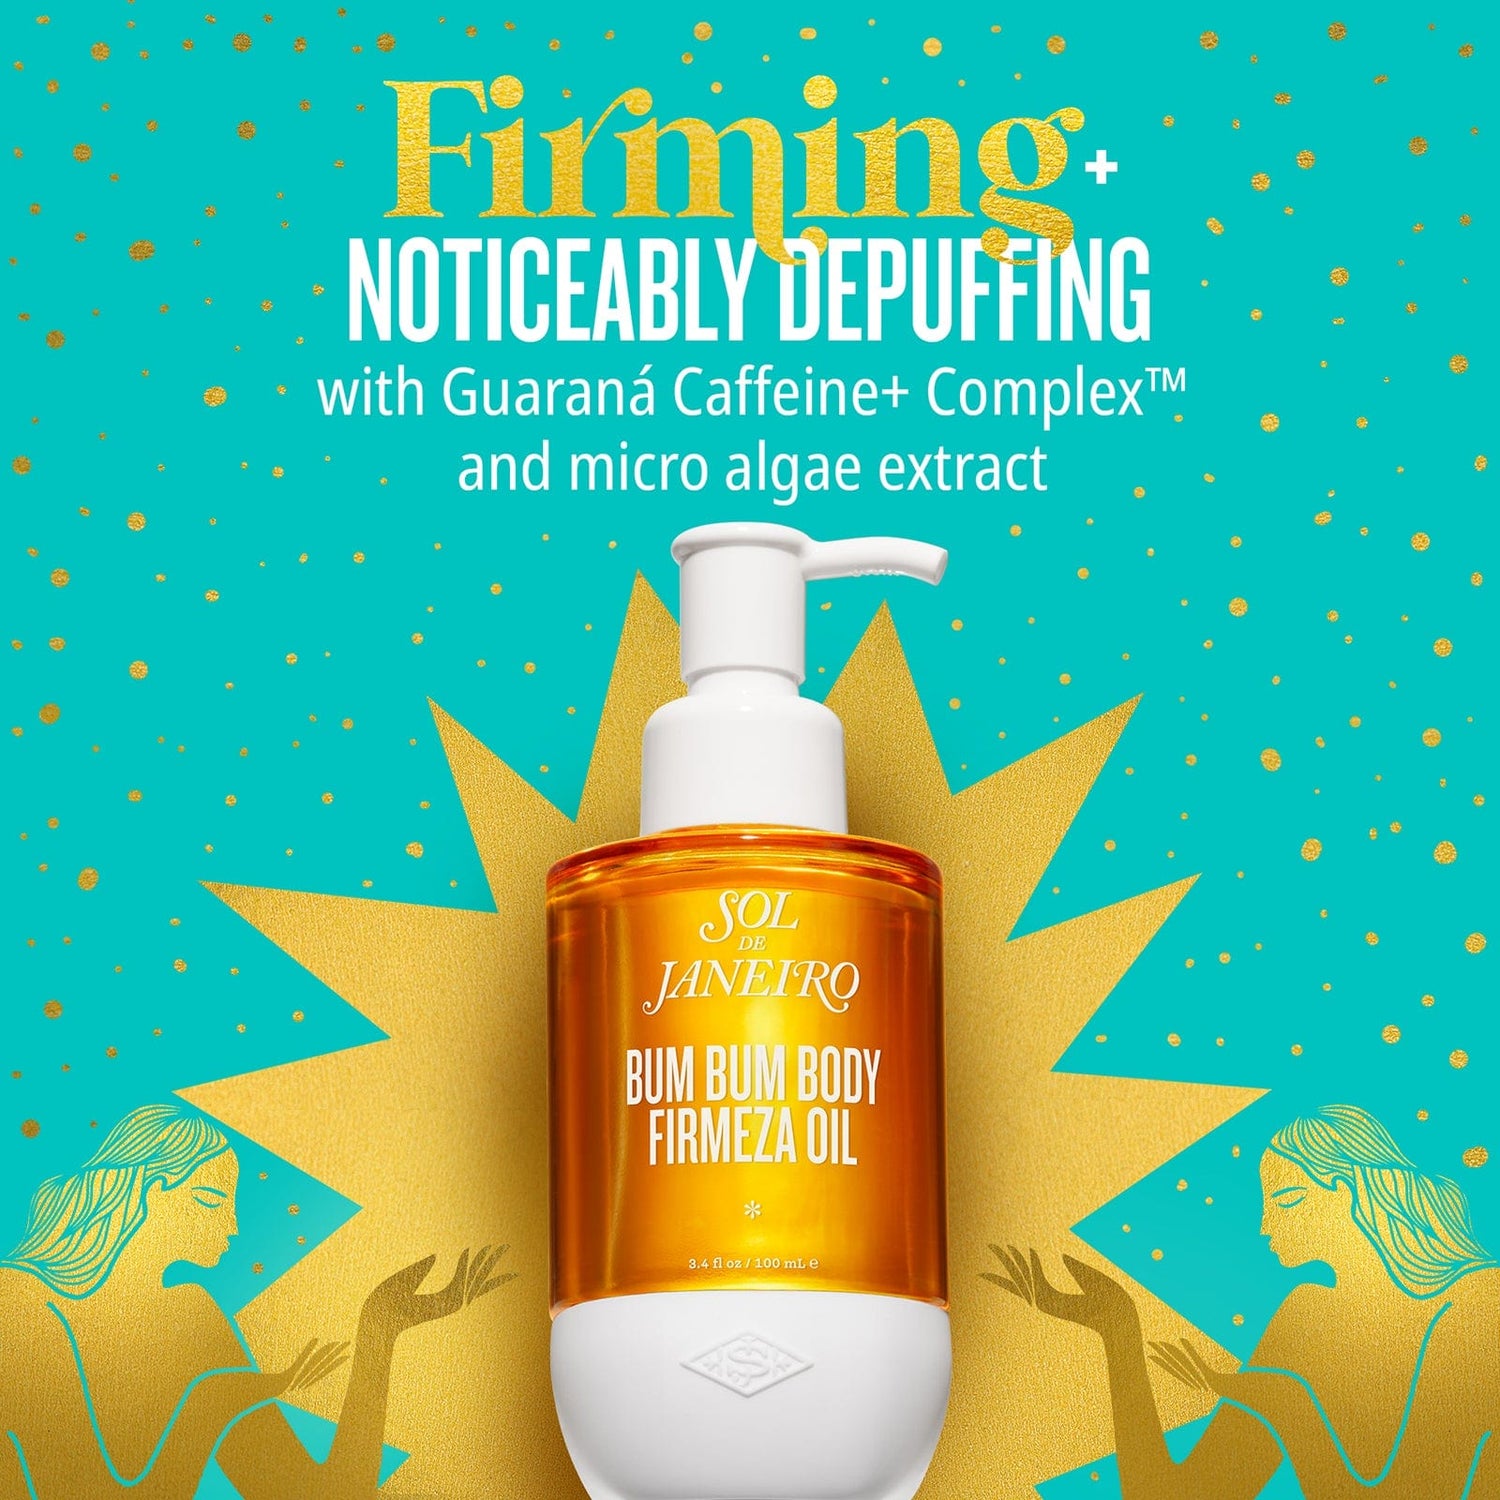 FIrming and noticeably depuffing with Guarana caffiene+ complex(TM) and micro algae extract